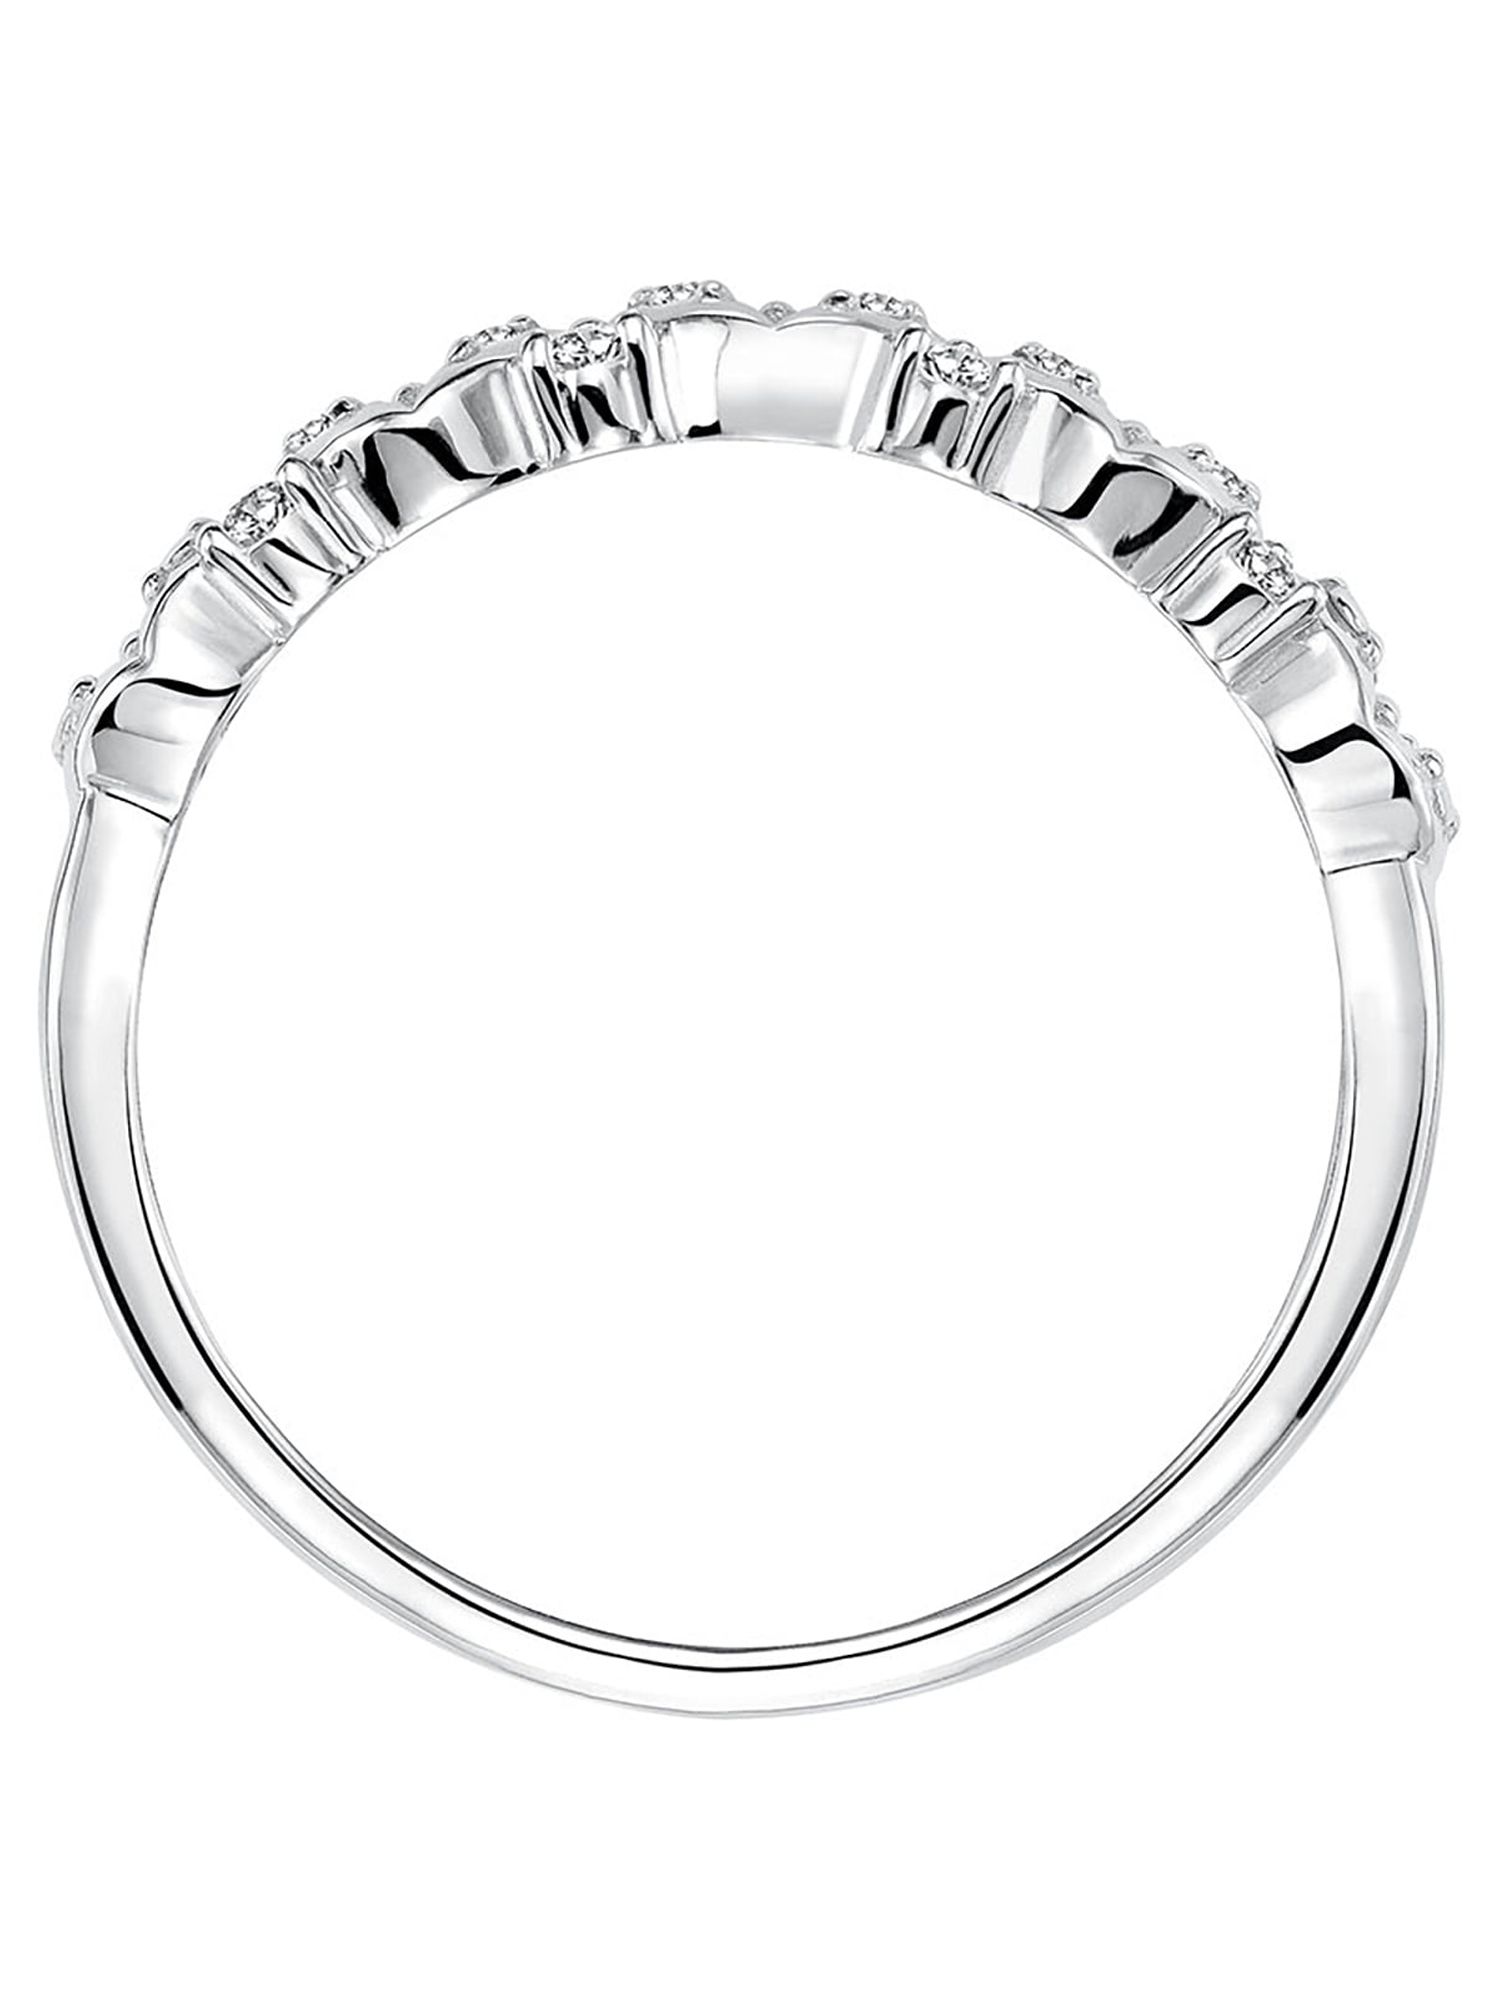 Sweet Remembrance 1/10 Carat T.W. Certified Diamond 10kt White Gold Women's Anniversary Band - image 3 of 7